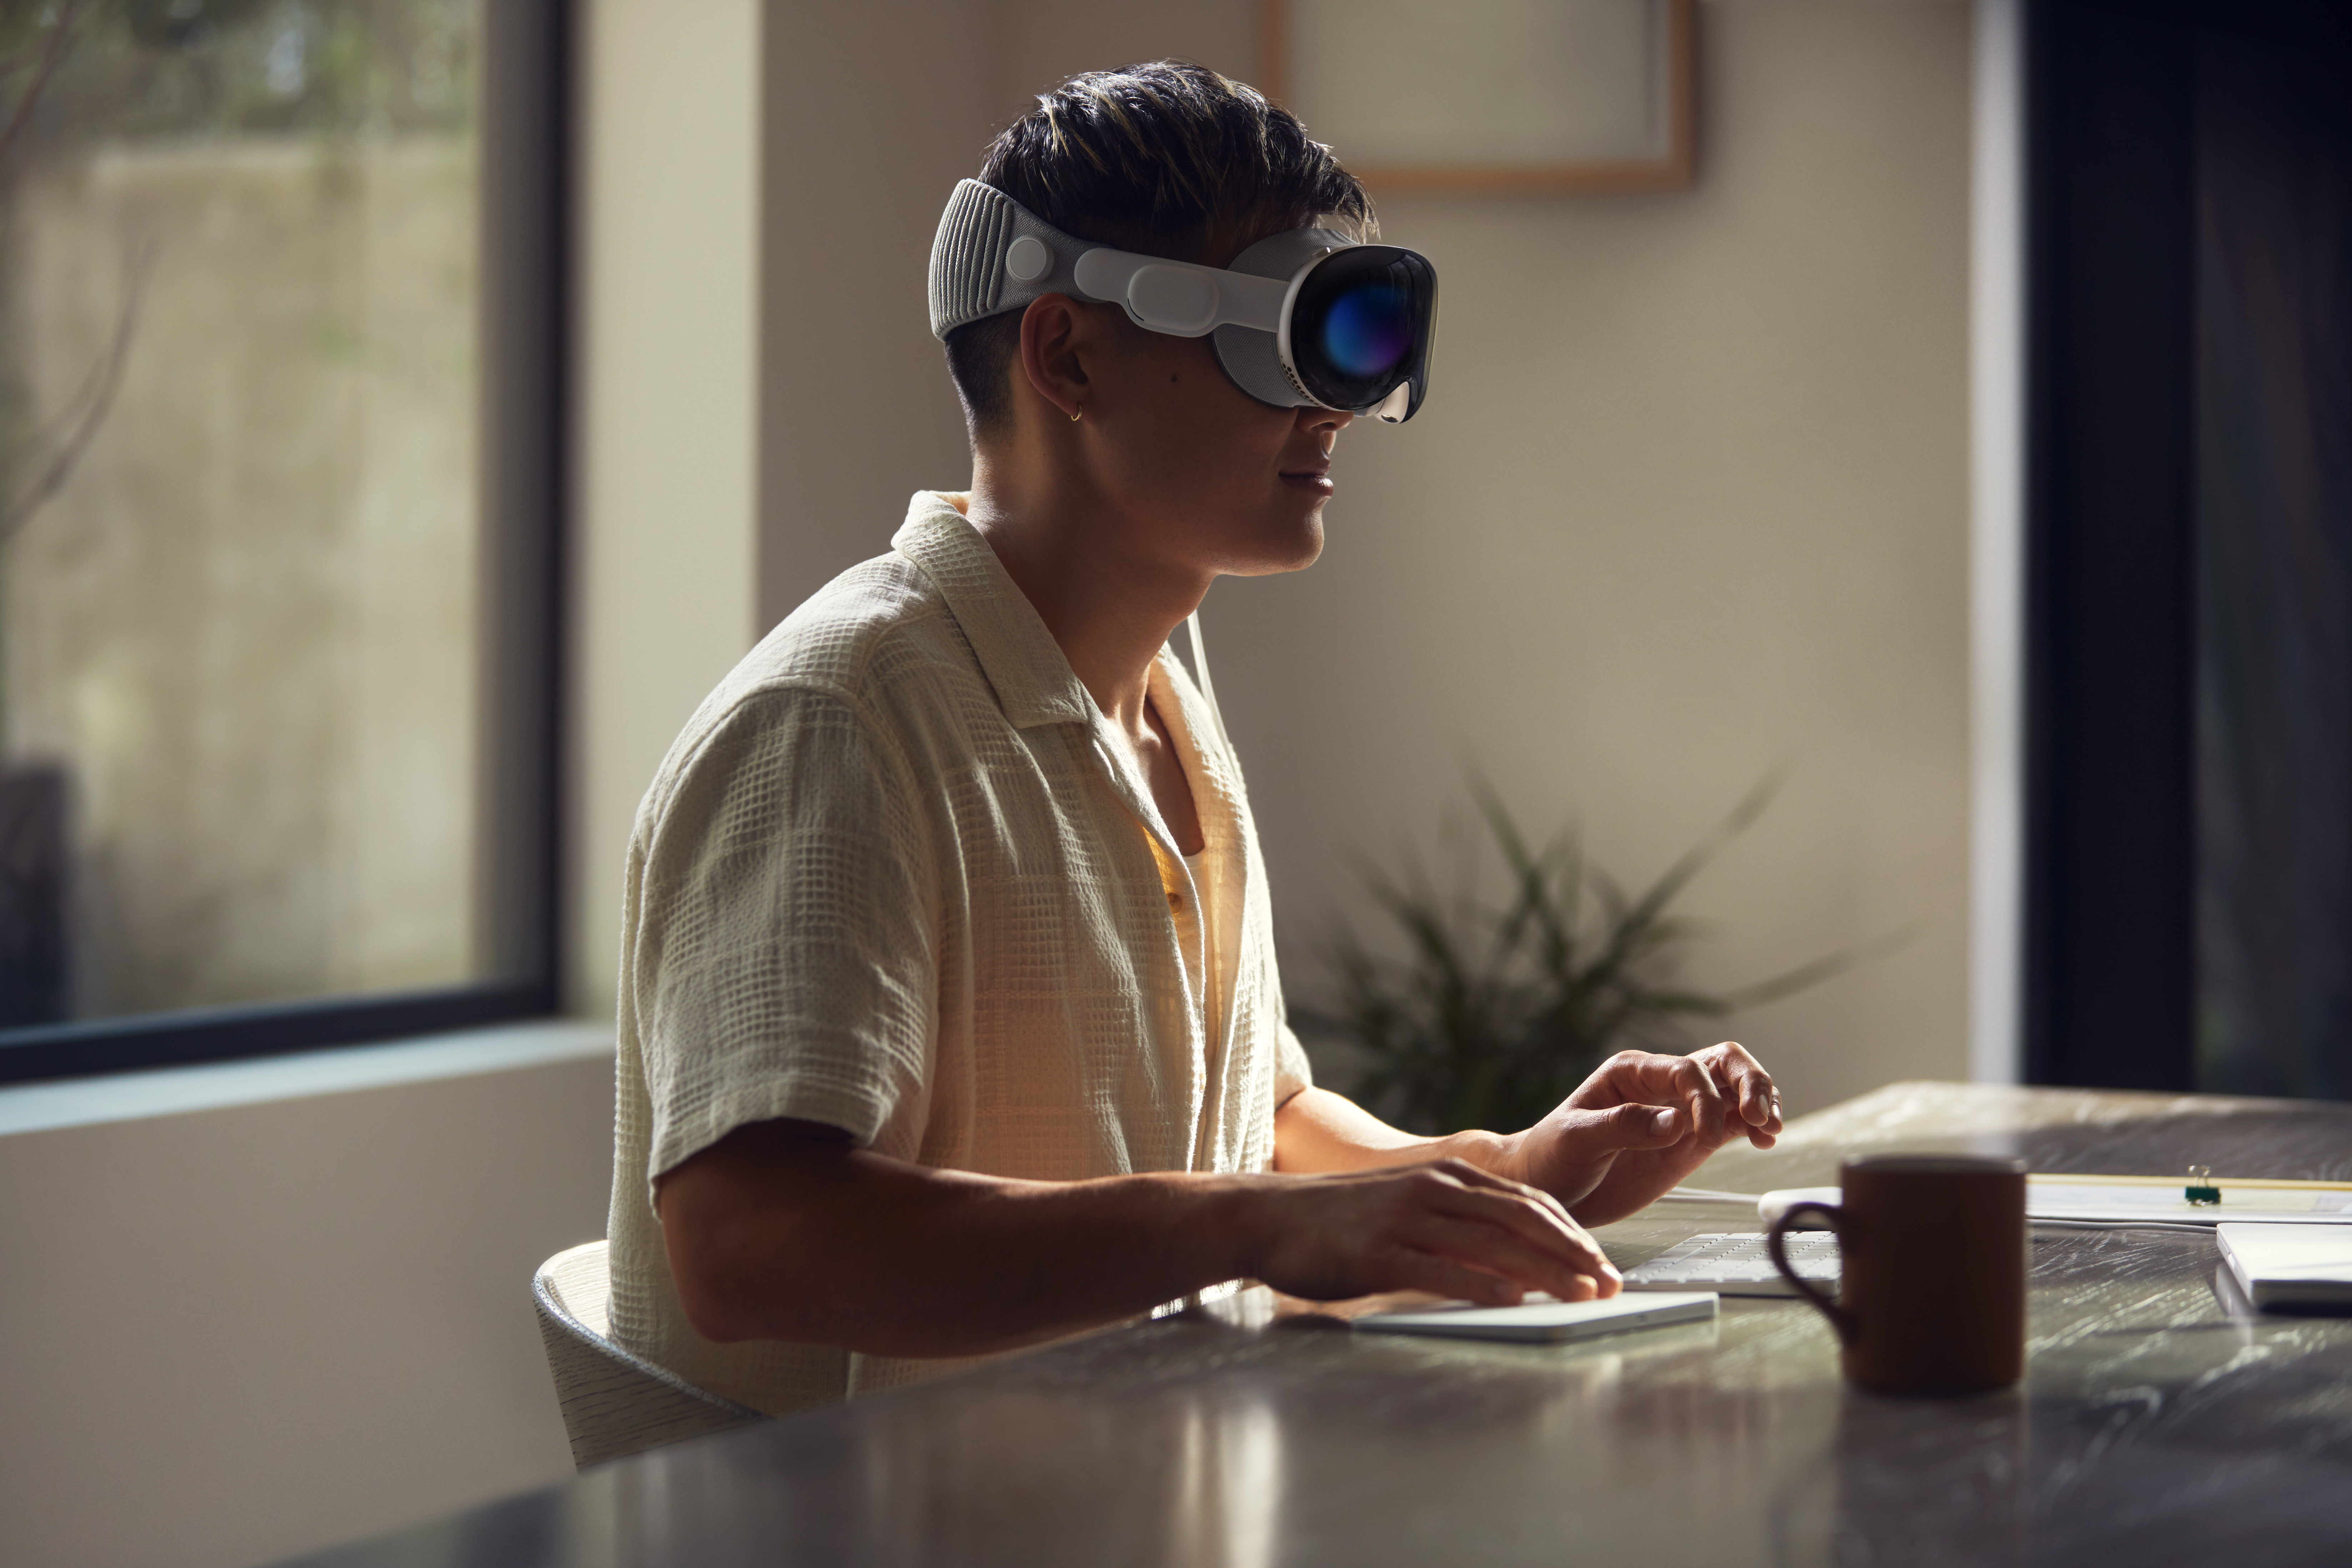 Apple Vision Pro - a head-mounted display for the metaverse